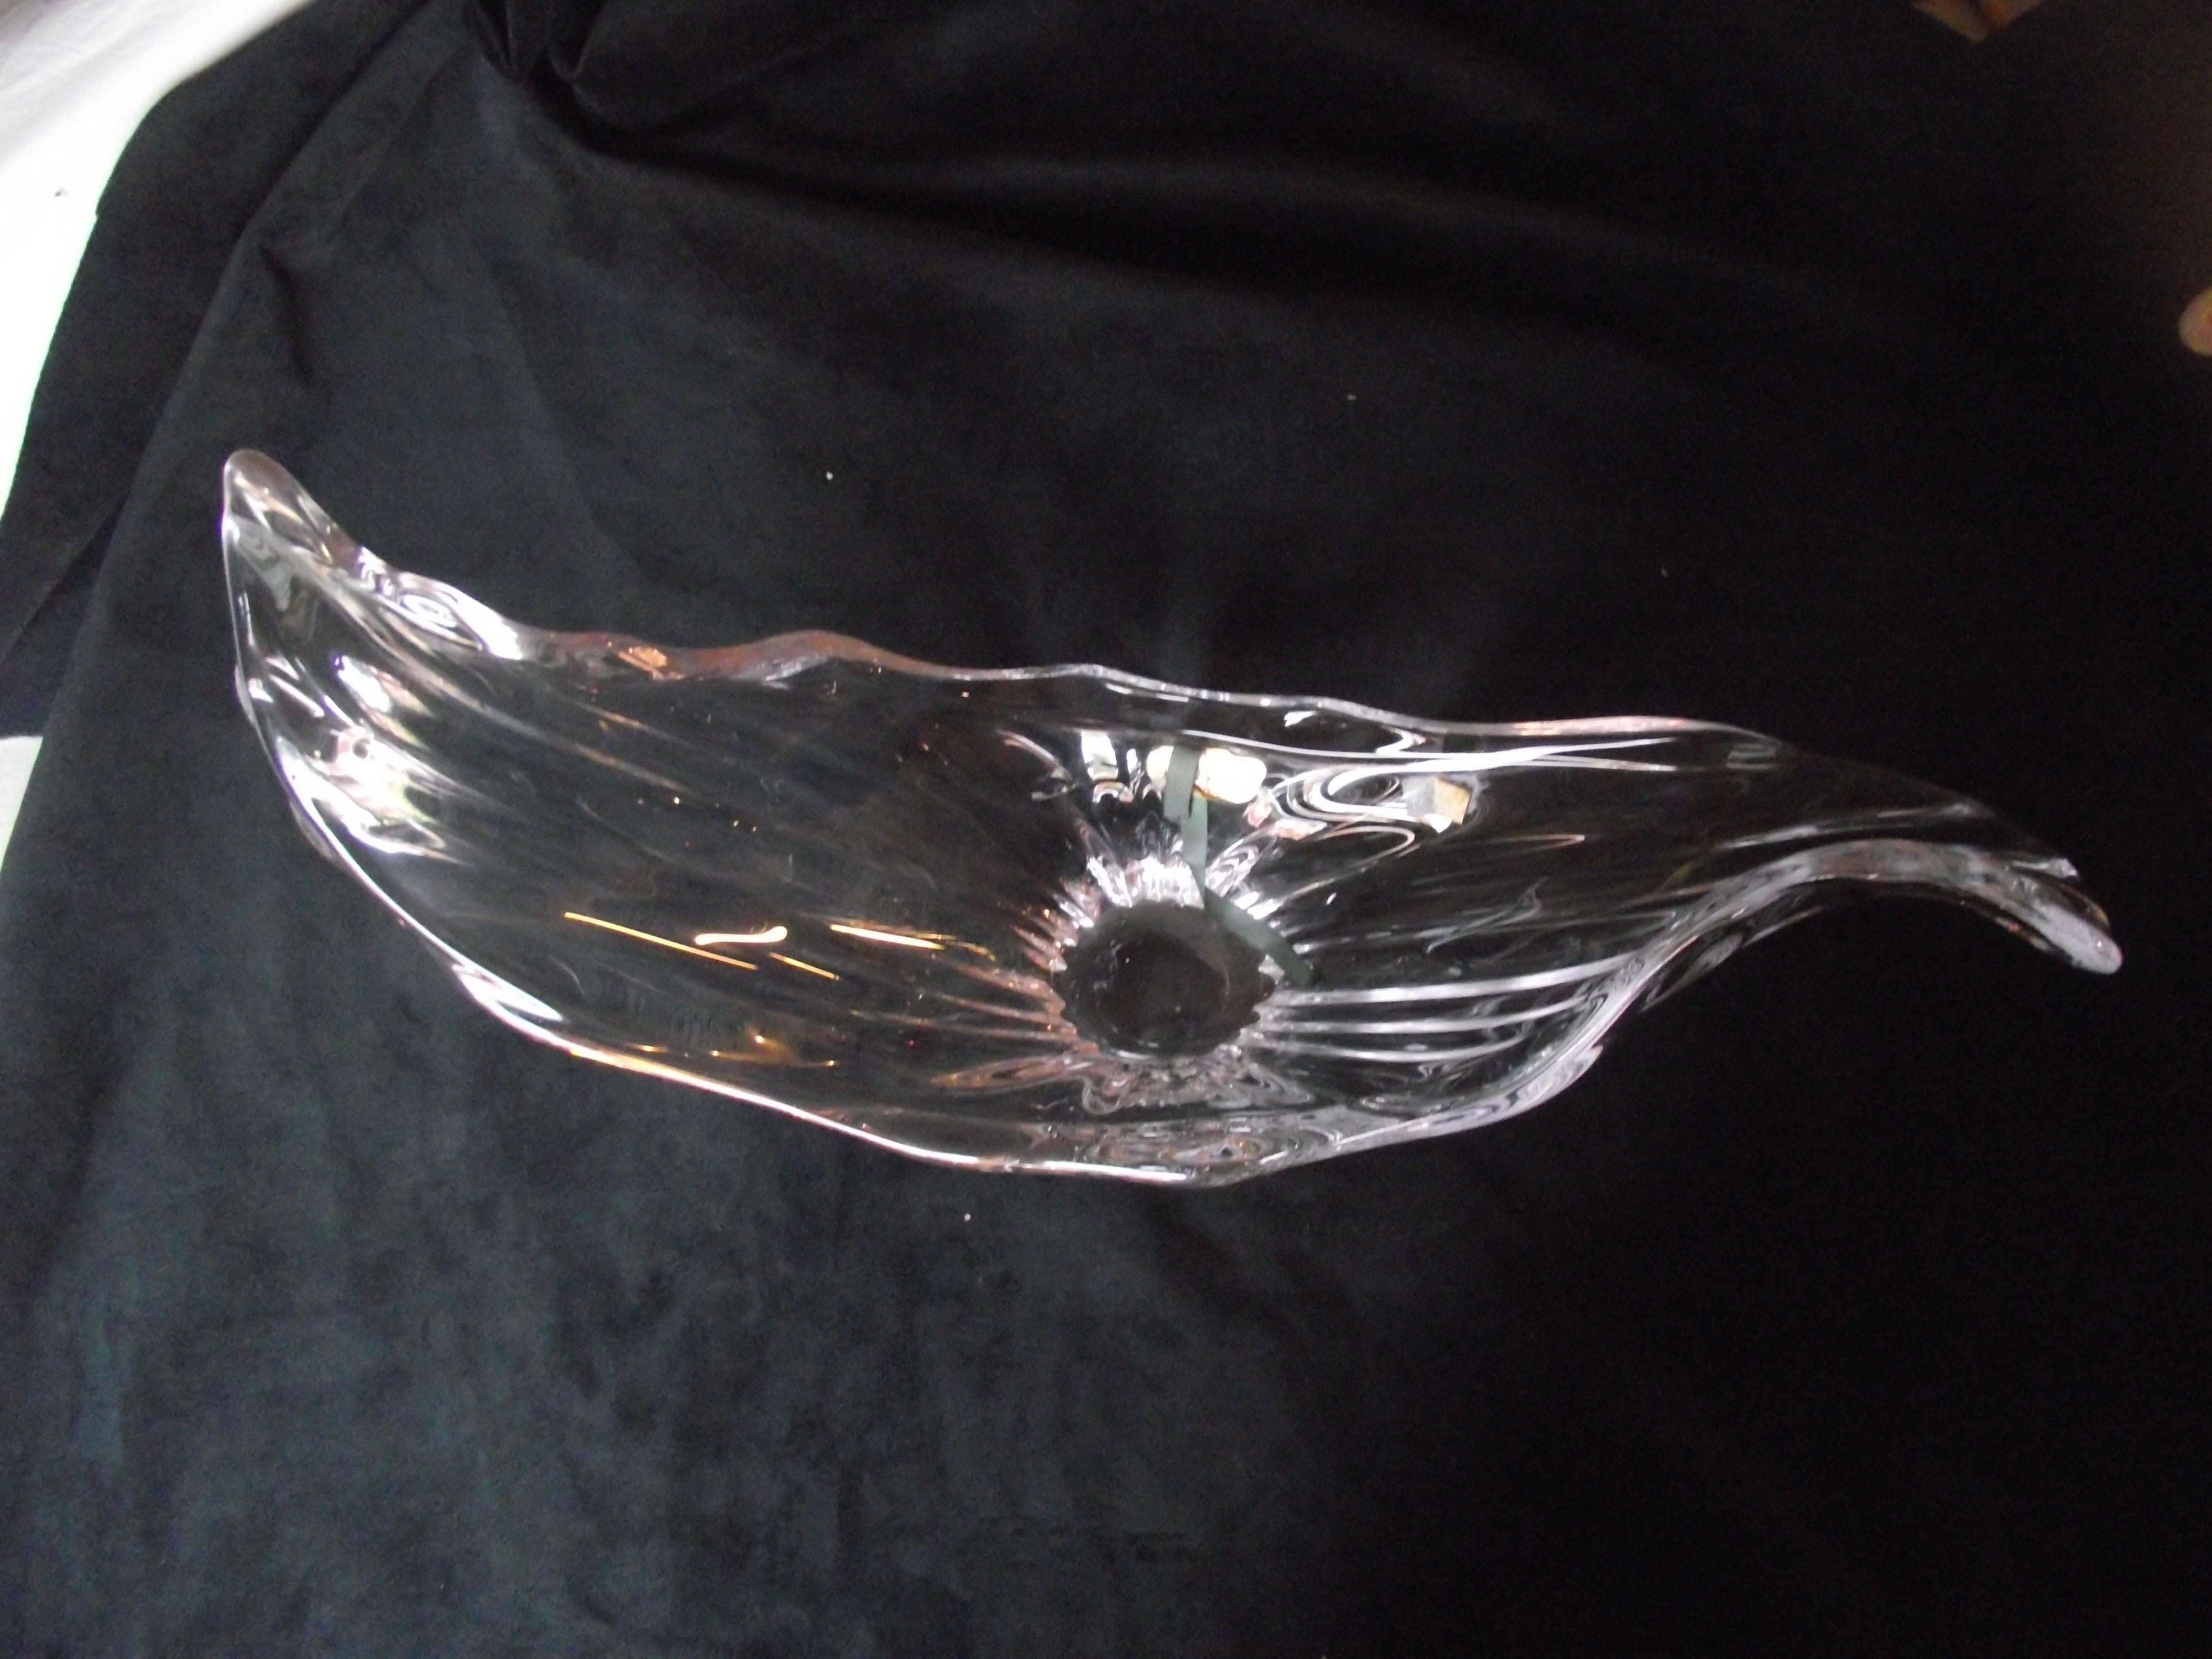 Made in France this striking center piece bowl is a fine example of Mid-Century Modern design. Its free-form design gives the illusion of ocean waves. This art piece has no mold marks, scratches, bubbles or chips. It is in perfect